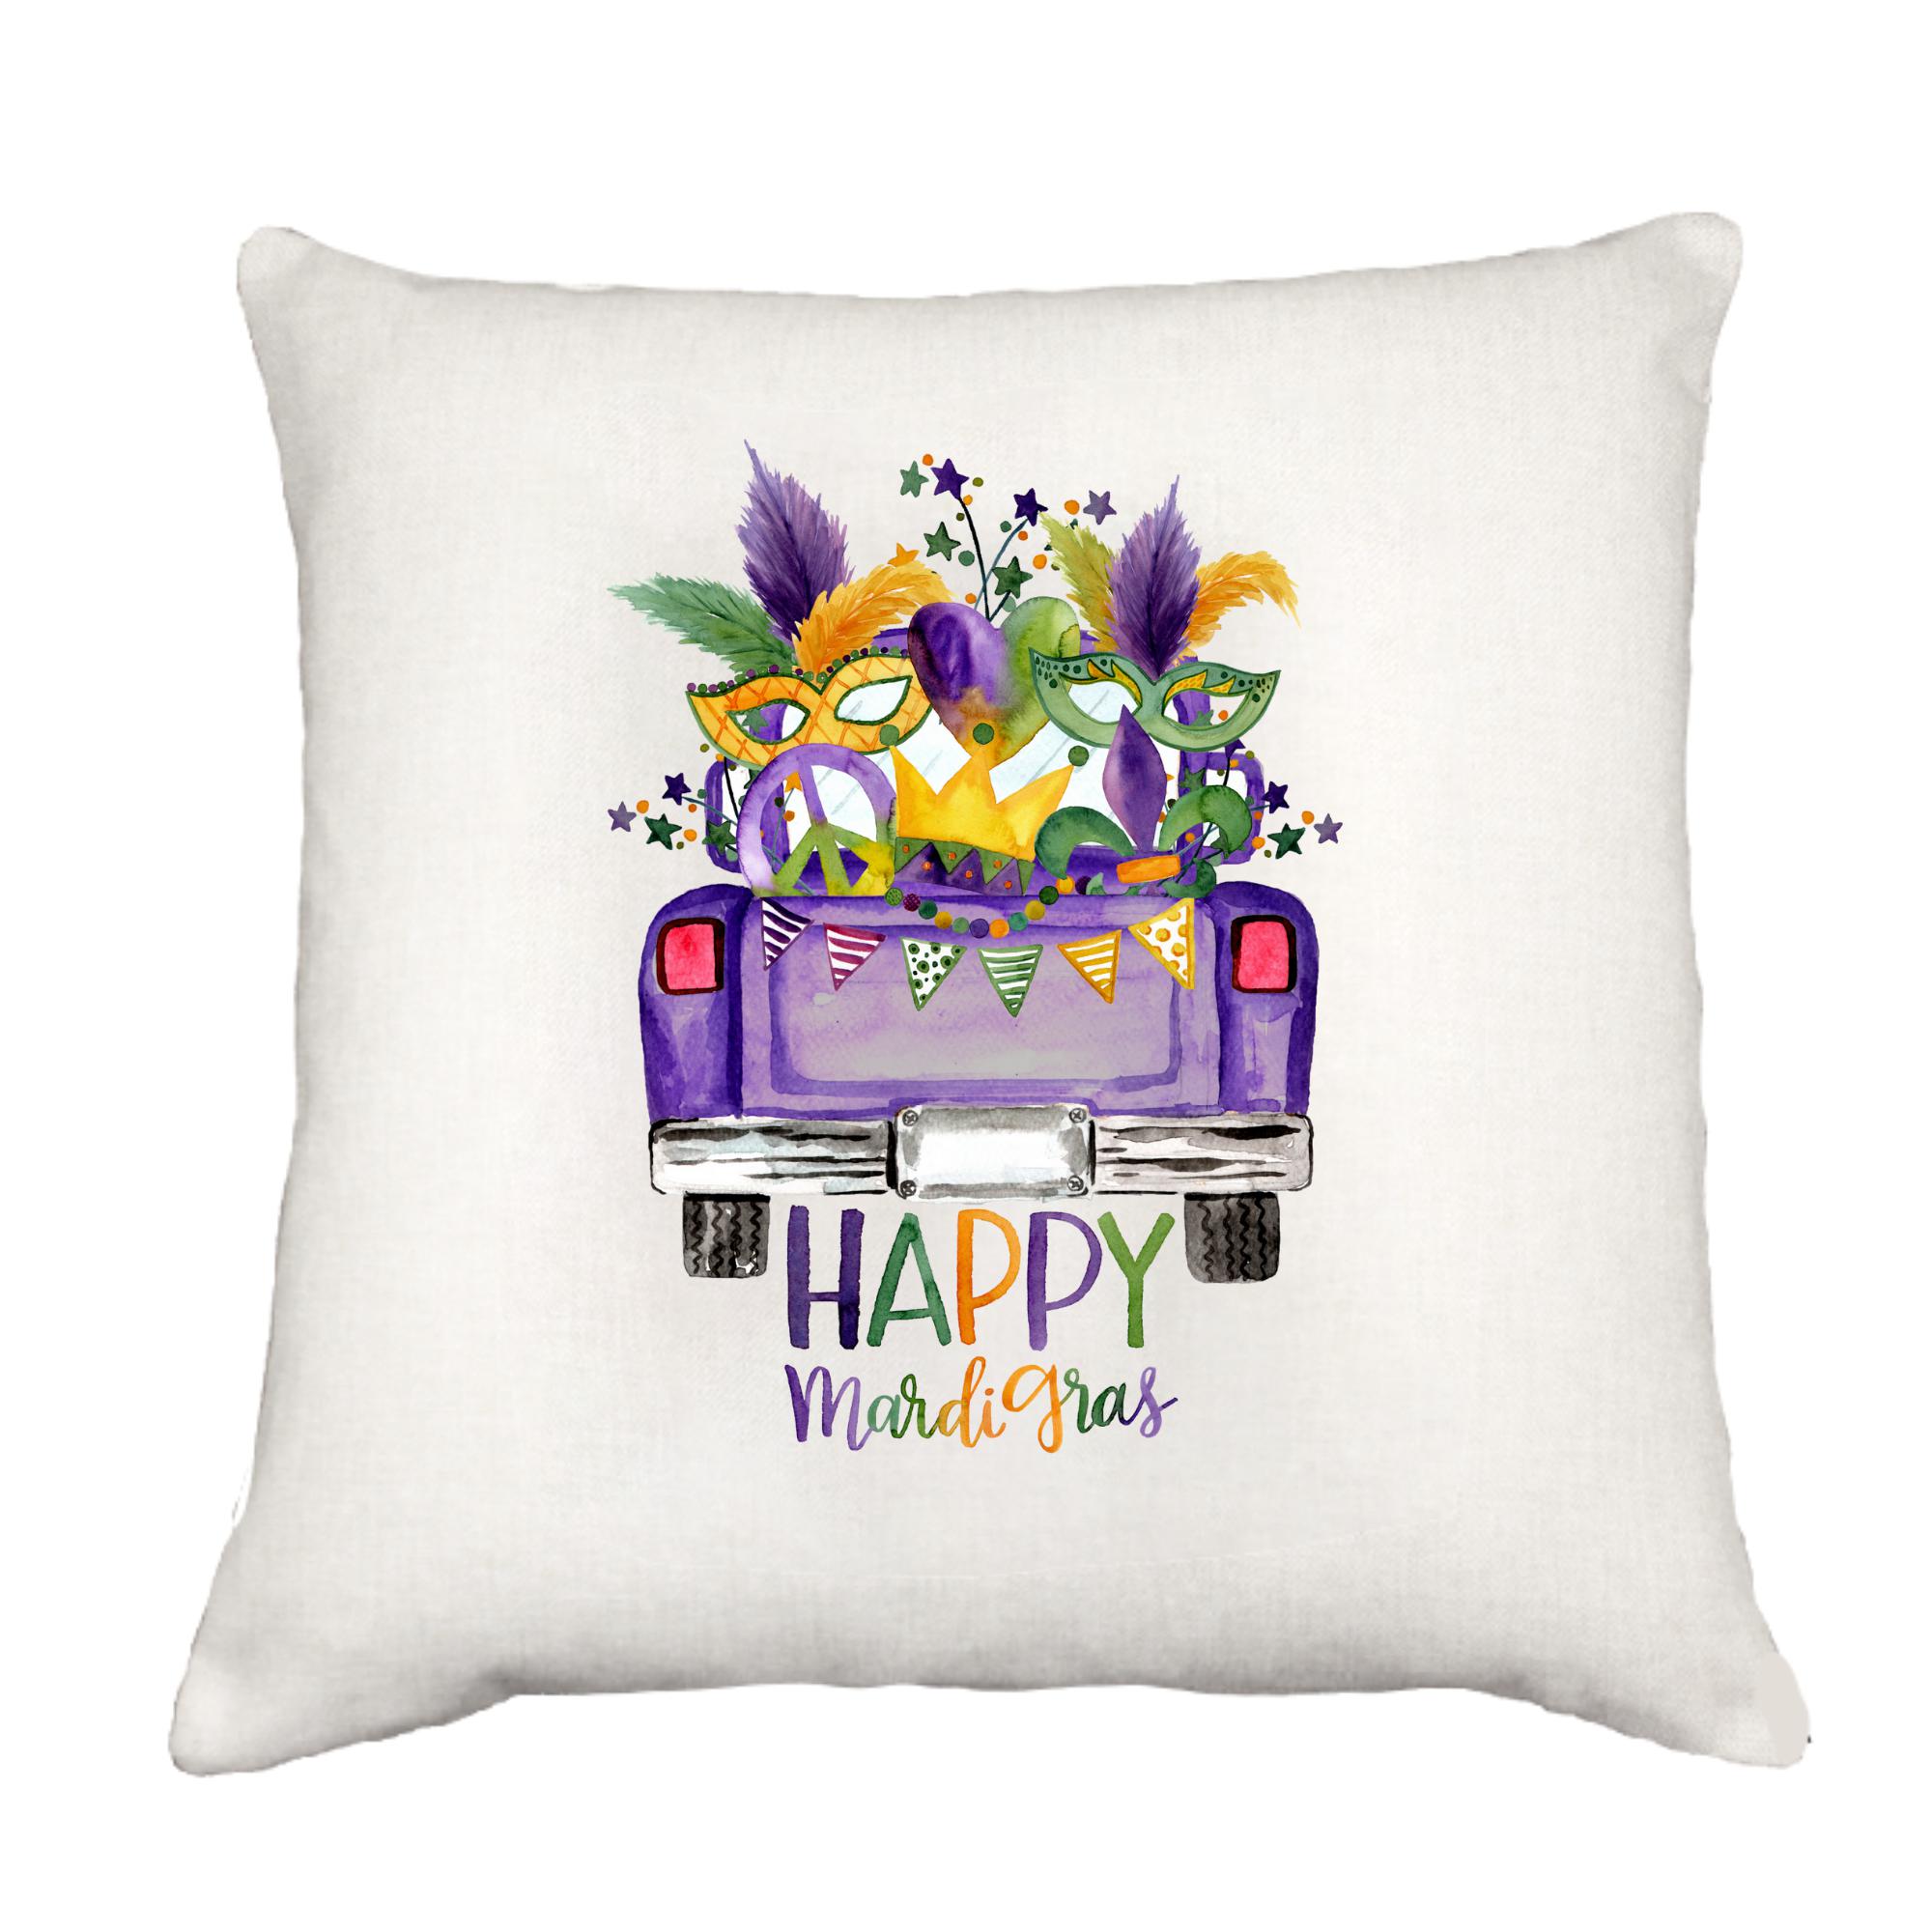 Mardi Gras Truck Cottage Pillow Throw/Decorative Pillow - Southern Sisters